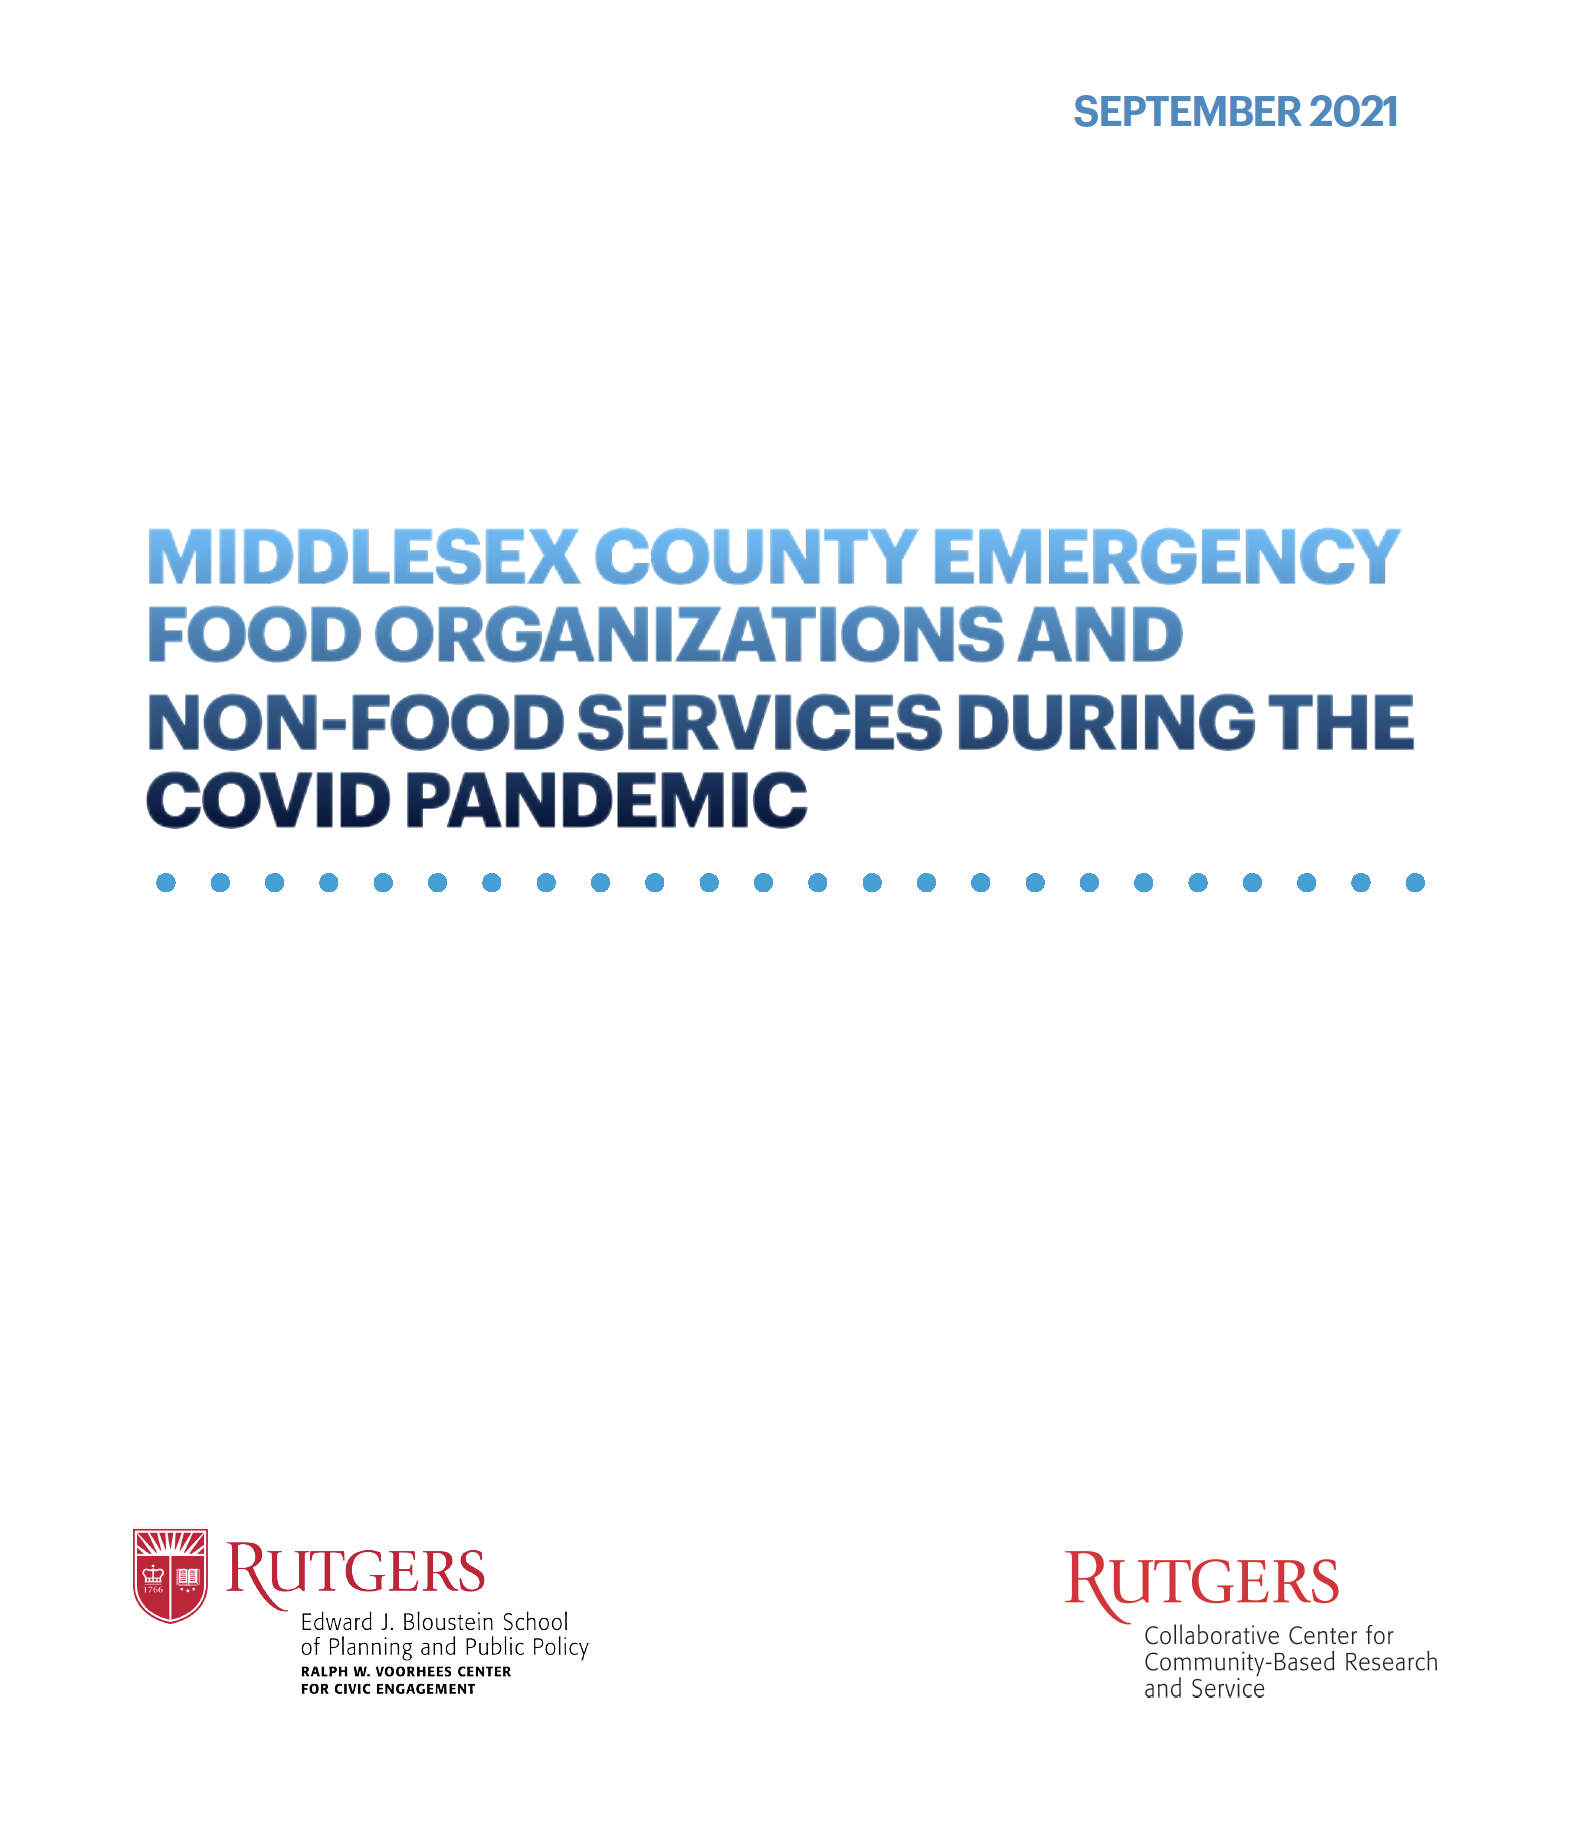 Middlesex County Emergency Food Organizations during COVID Pandemic